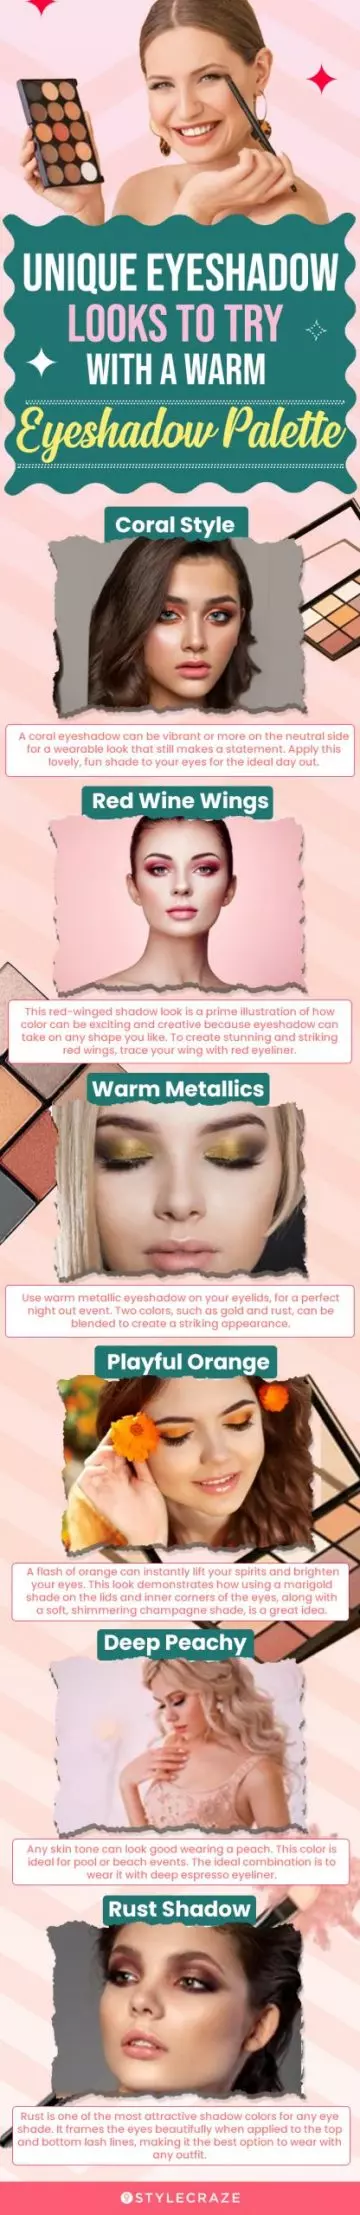 Unique Eyeshadow Looks To Try With A Warm Eyeshadow Palette (infographic)